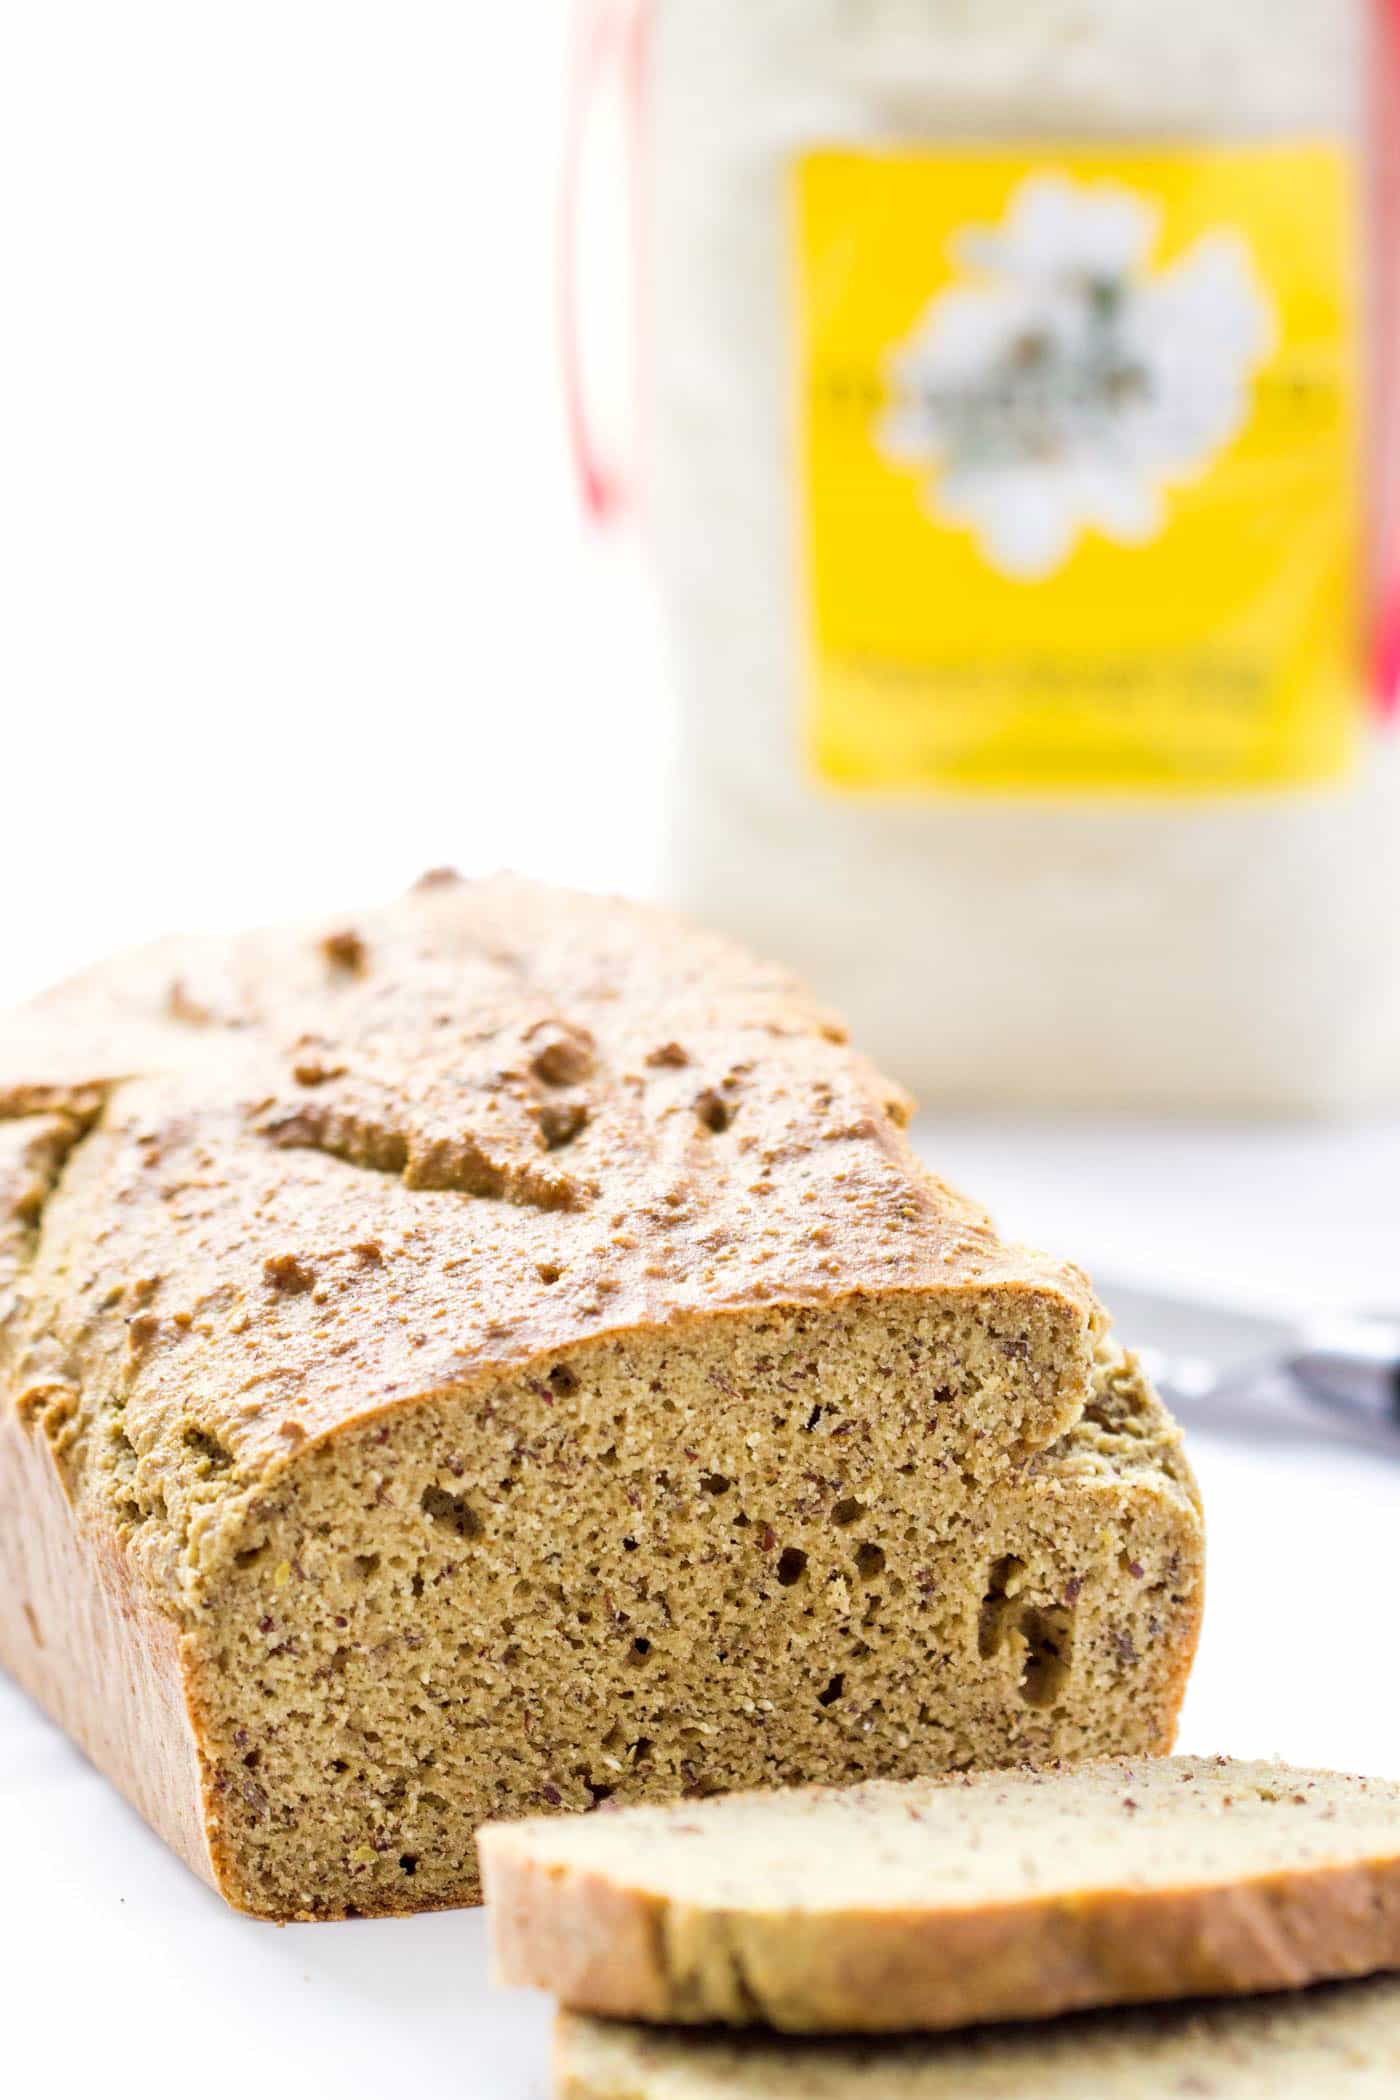 Quinoa Almond Flour Bread made with blanched almond flour, flaxseed meal and other gluten-free goodies